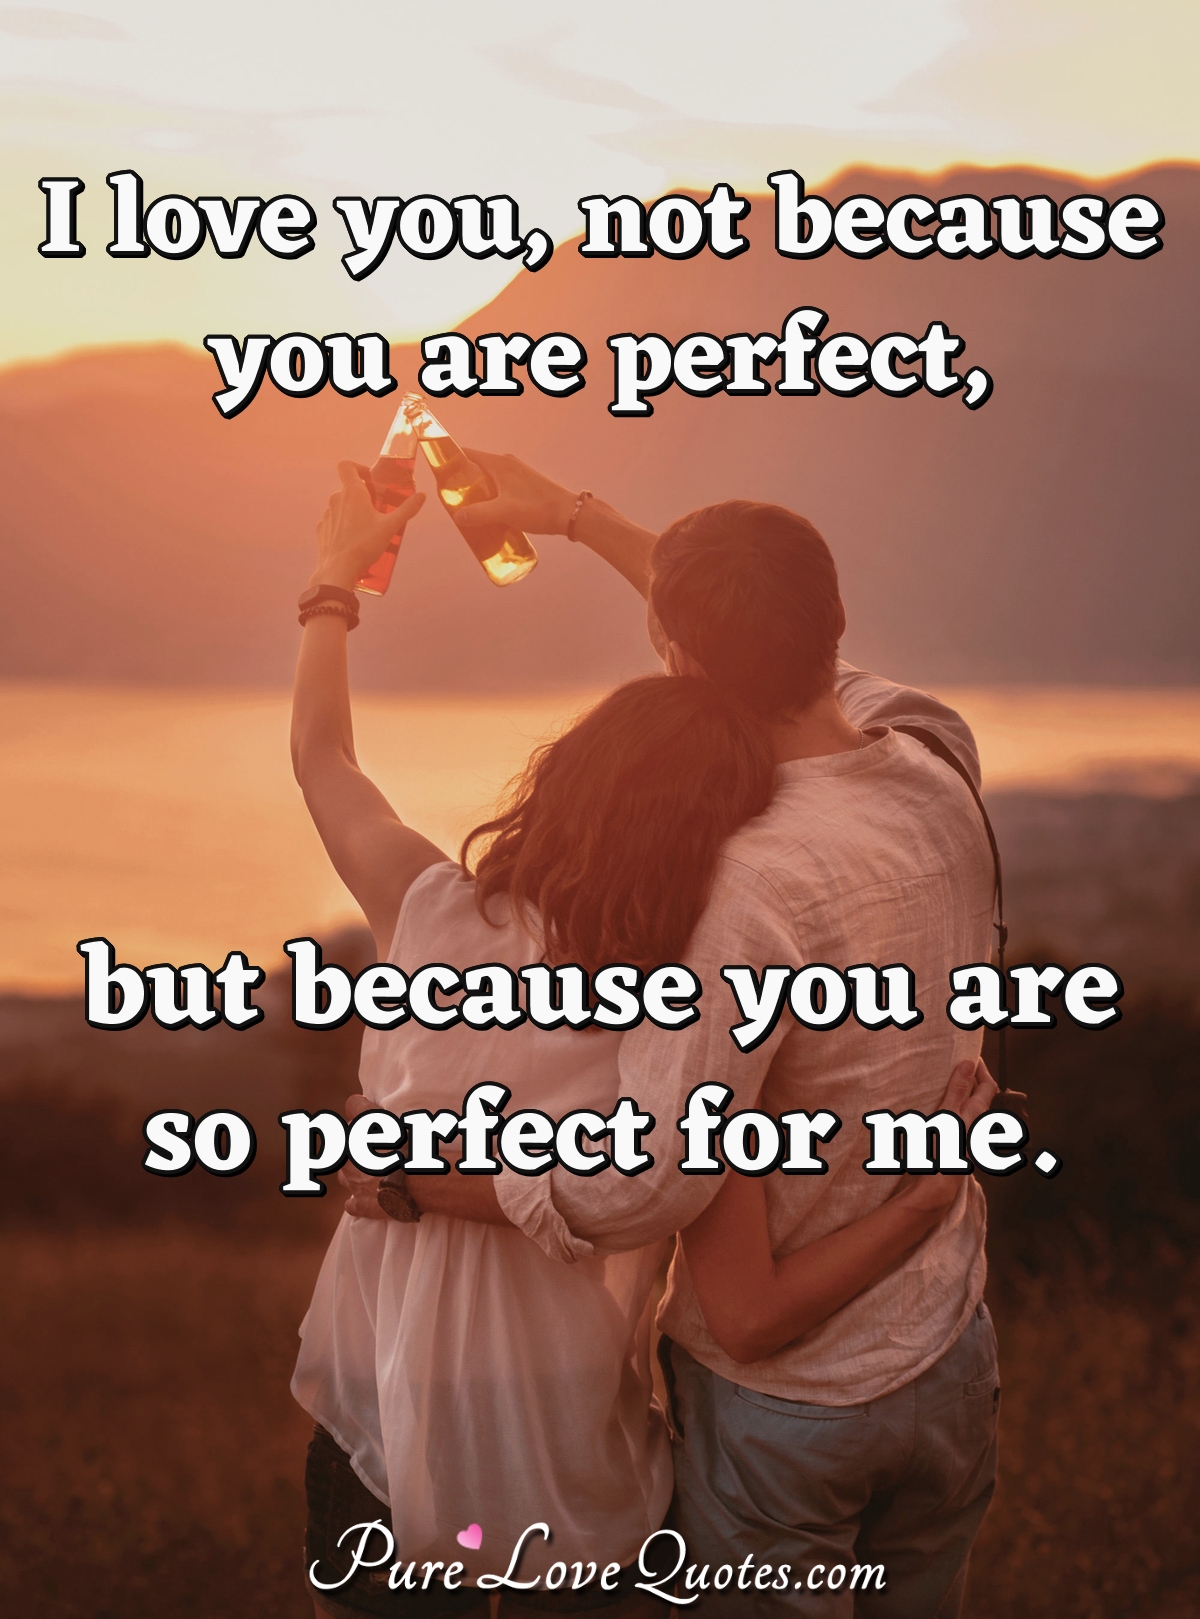 I Love You, Not Because You Are Perfect, But Because You Are So Perfect For Me. | Purelovequotes